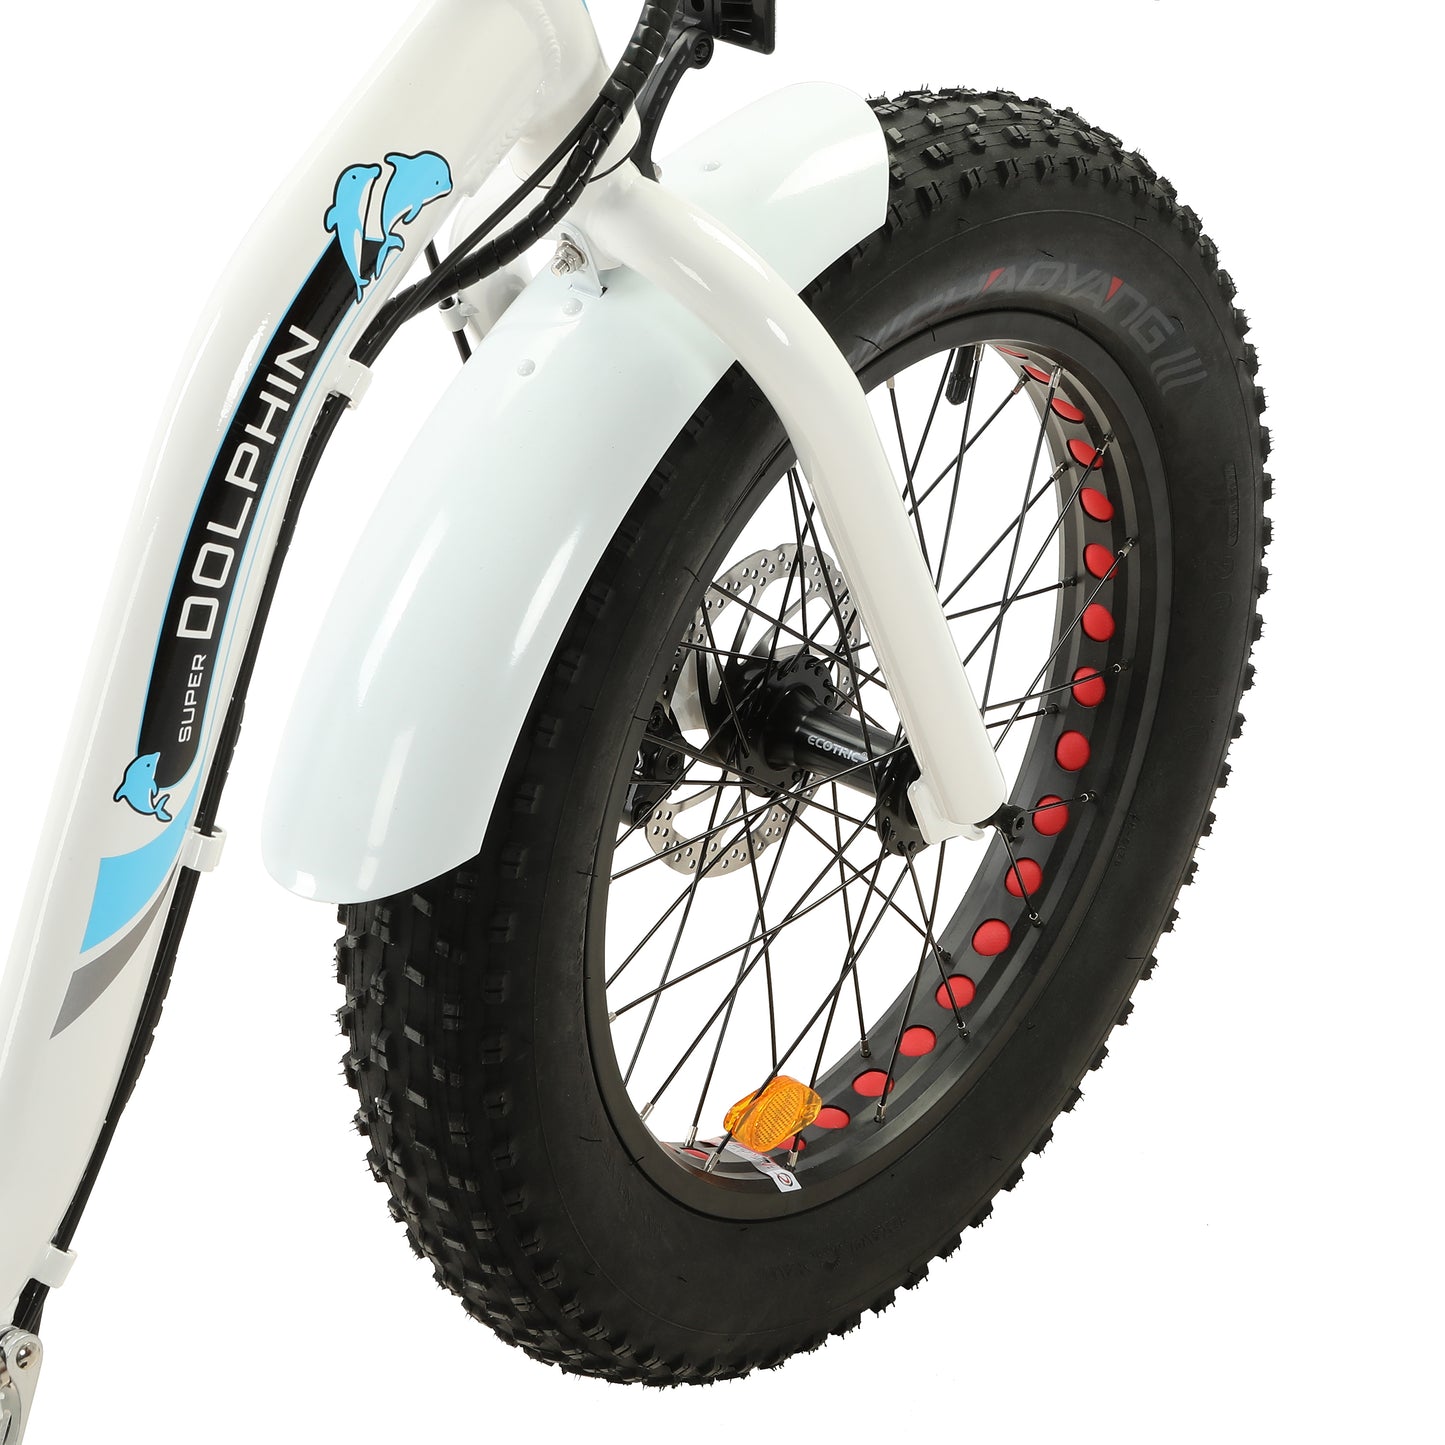 UL Certified-Ecotric Portable and Folding Fat Bike Model Dolphin - White